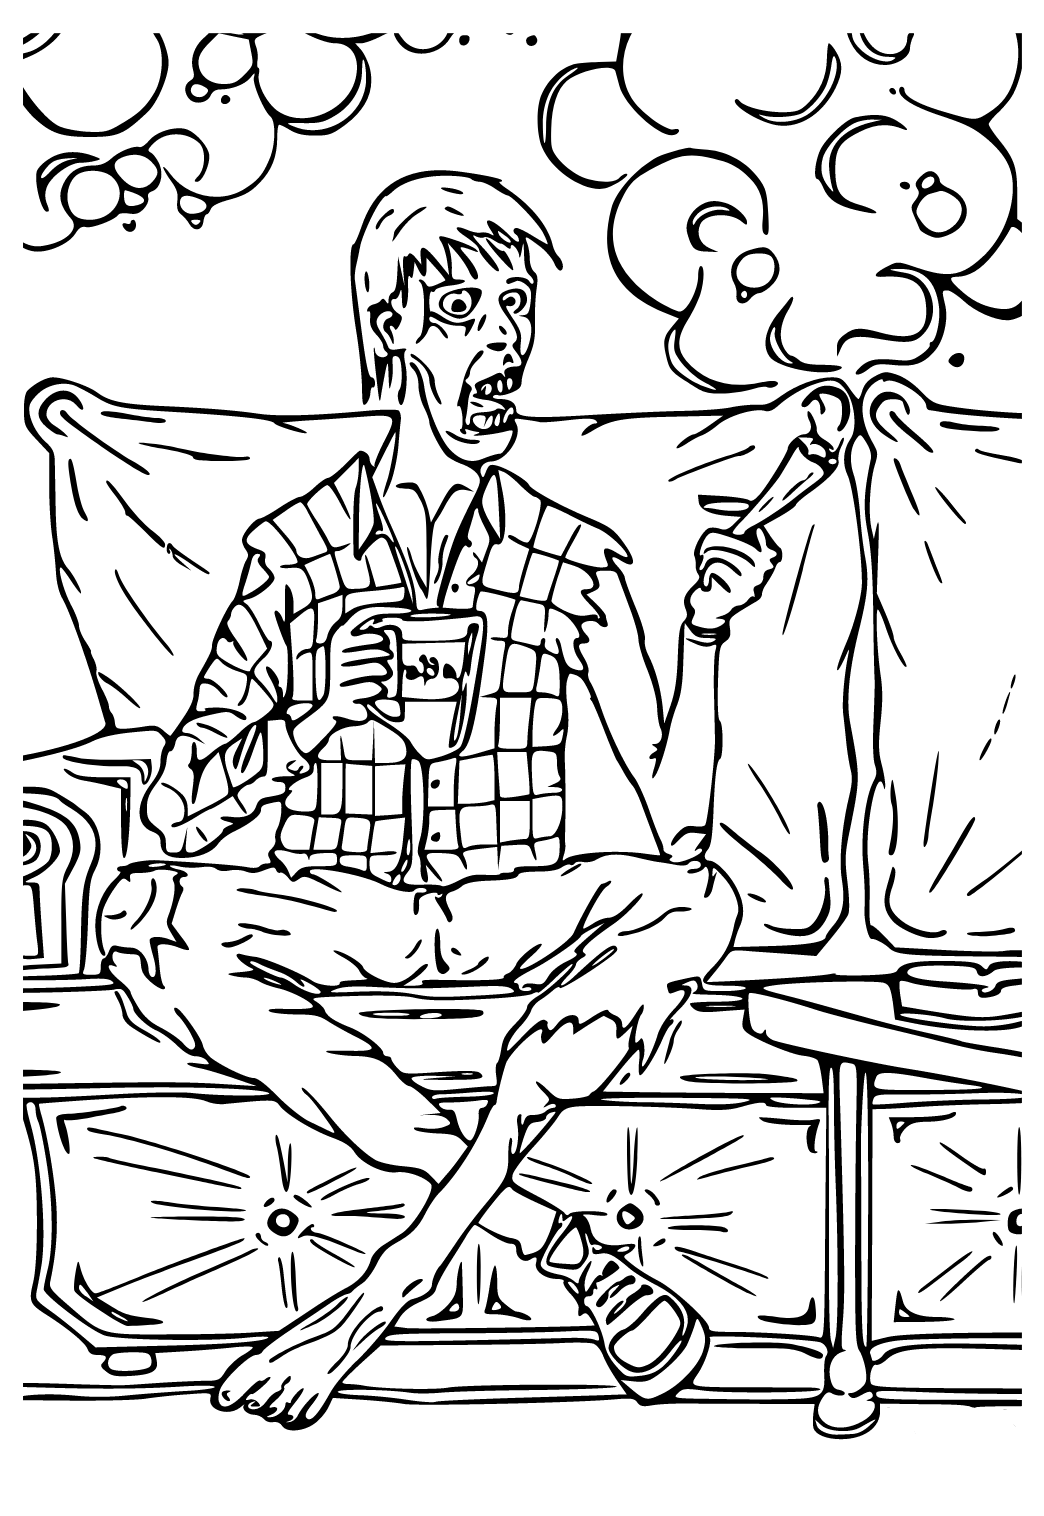 Free printable stoner sofa coloring page for adults and kids